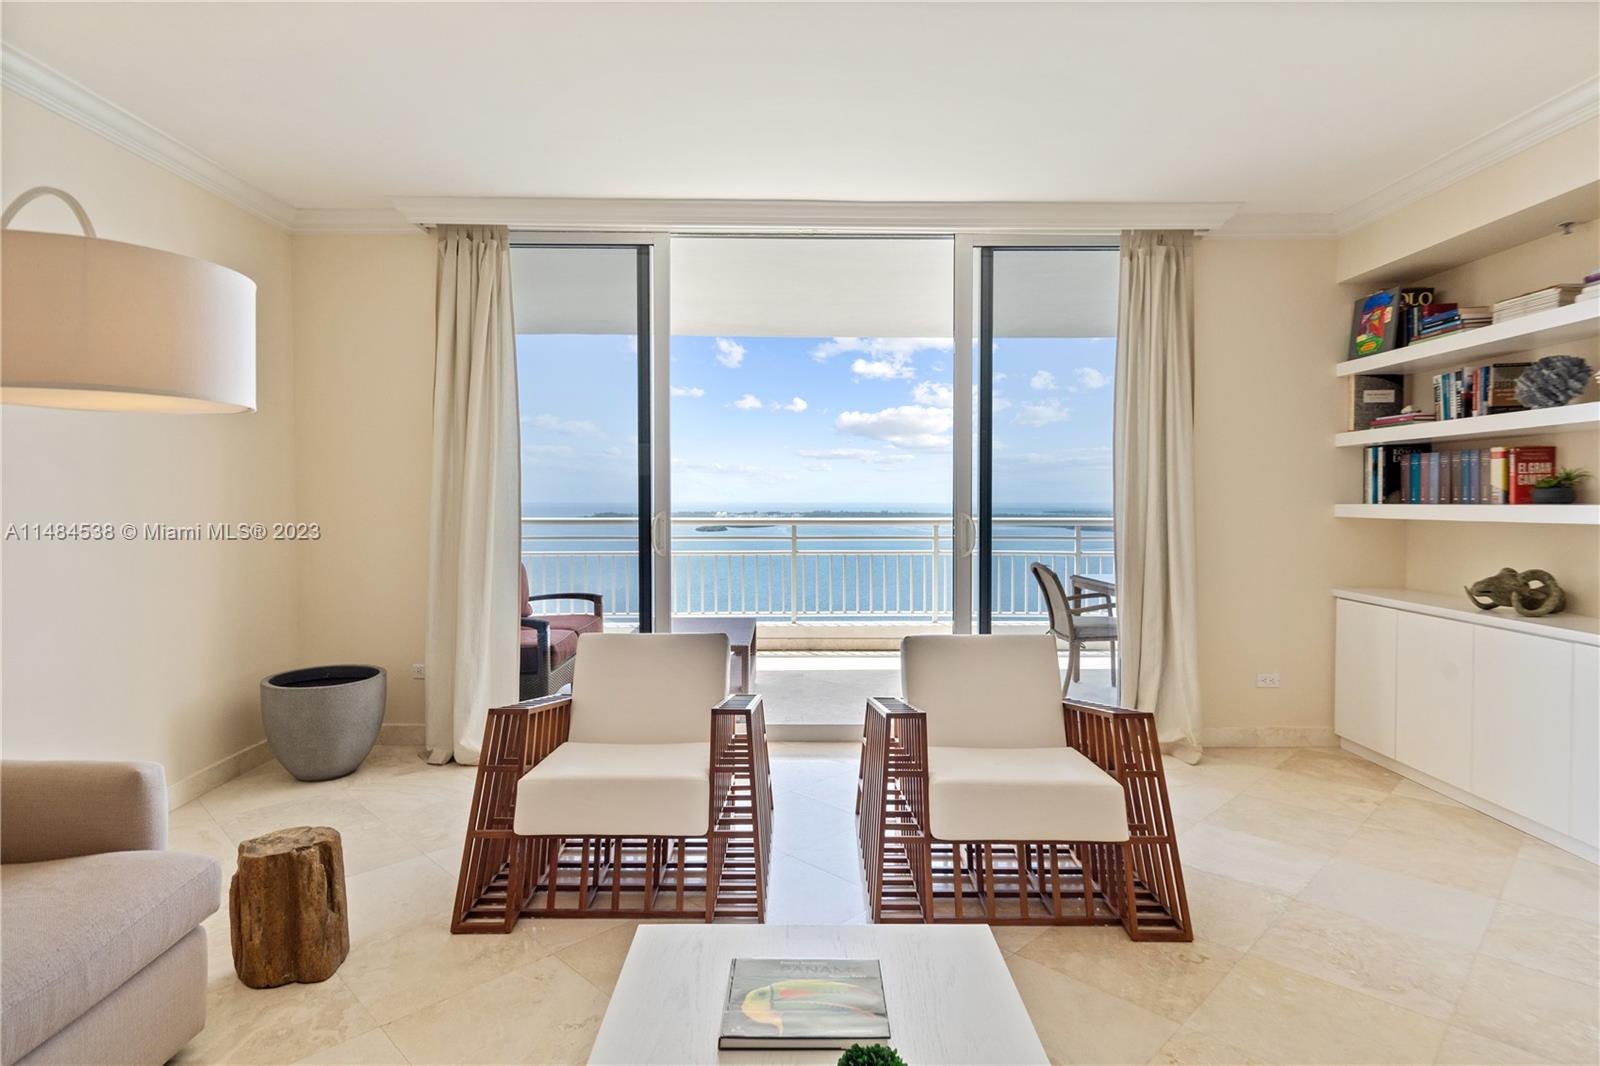 Endless Bay/Ocean views from this rare 2,510 sq/ft high floor 3/3/1 unit at Two Tequesta Point. Freshly Painted. This unit has marble floor, an eat-in kitchen, formal dining, extra storage, 2 PARKING SPACES, a large master suite, a gorgeous foyer entry, a laundry room, & a giant balcony. All Bedrooms have amazing views. The Master has direct balcony access, and a large walk-in closet. The Master Bath has a marble shower, jacuzzi, double vanity, separate toilet/bidet room, & 2 linen closets. Two Tequesta is a luxury condo on an island called Brickell Key, in the heart of Miami's Brickell area. It has a bayside pool deck w/ BBQ's & hot tubs, a 2-story top of line fitness center w/ basketball/racquetball/ squash/pilates/massage & more, tennis, 2 conference rooms, a kids room, & a party room.